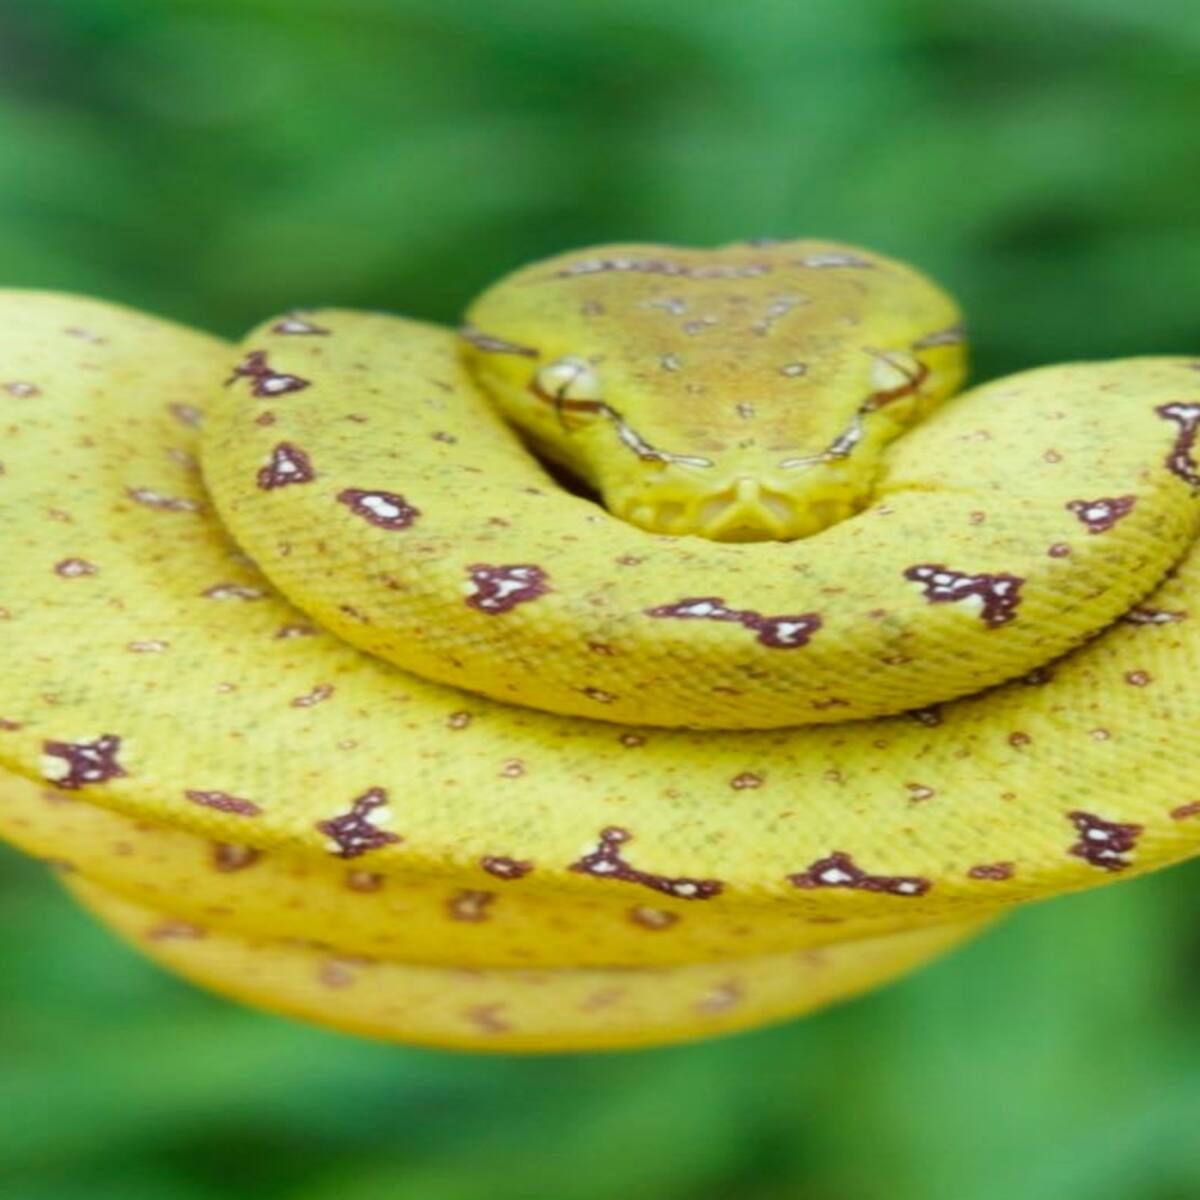 10 Most Beautiful Snakes in The World